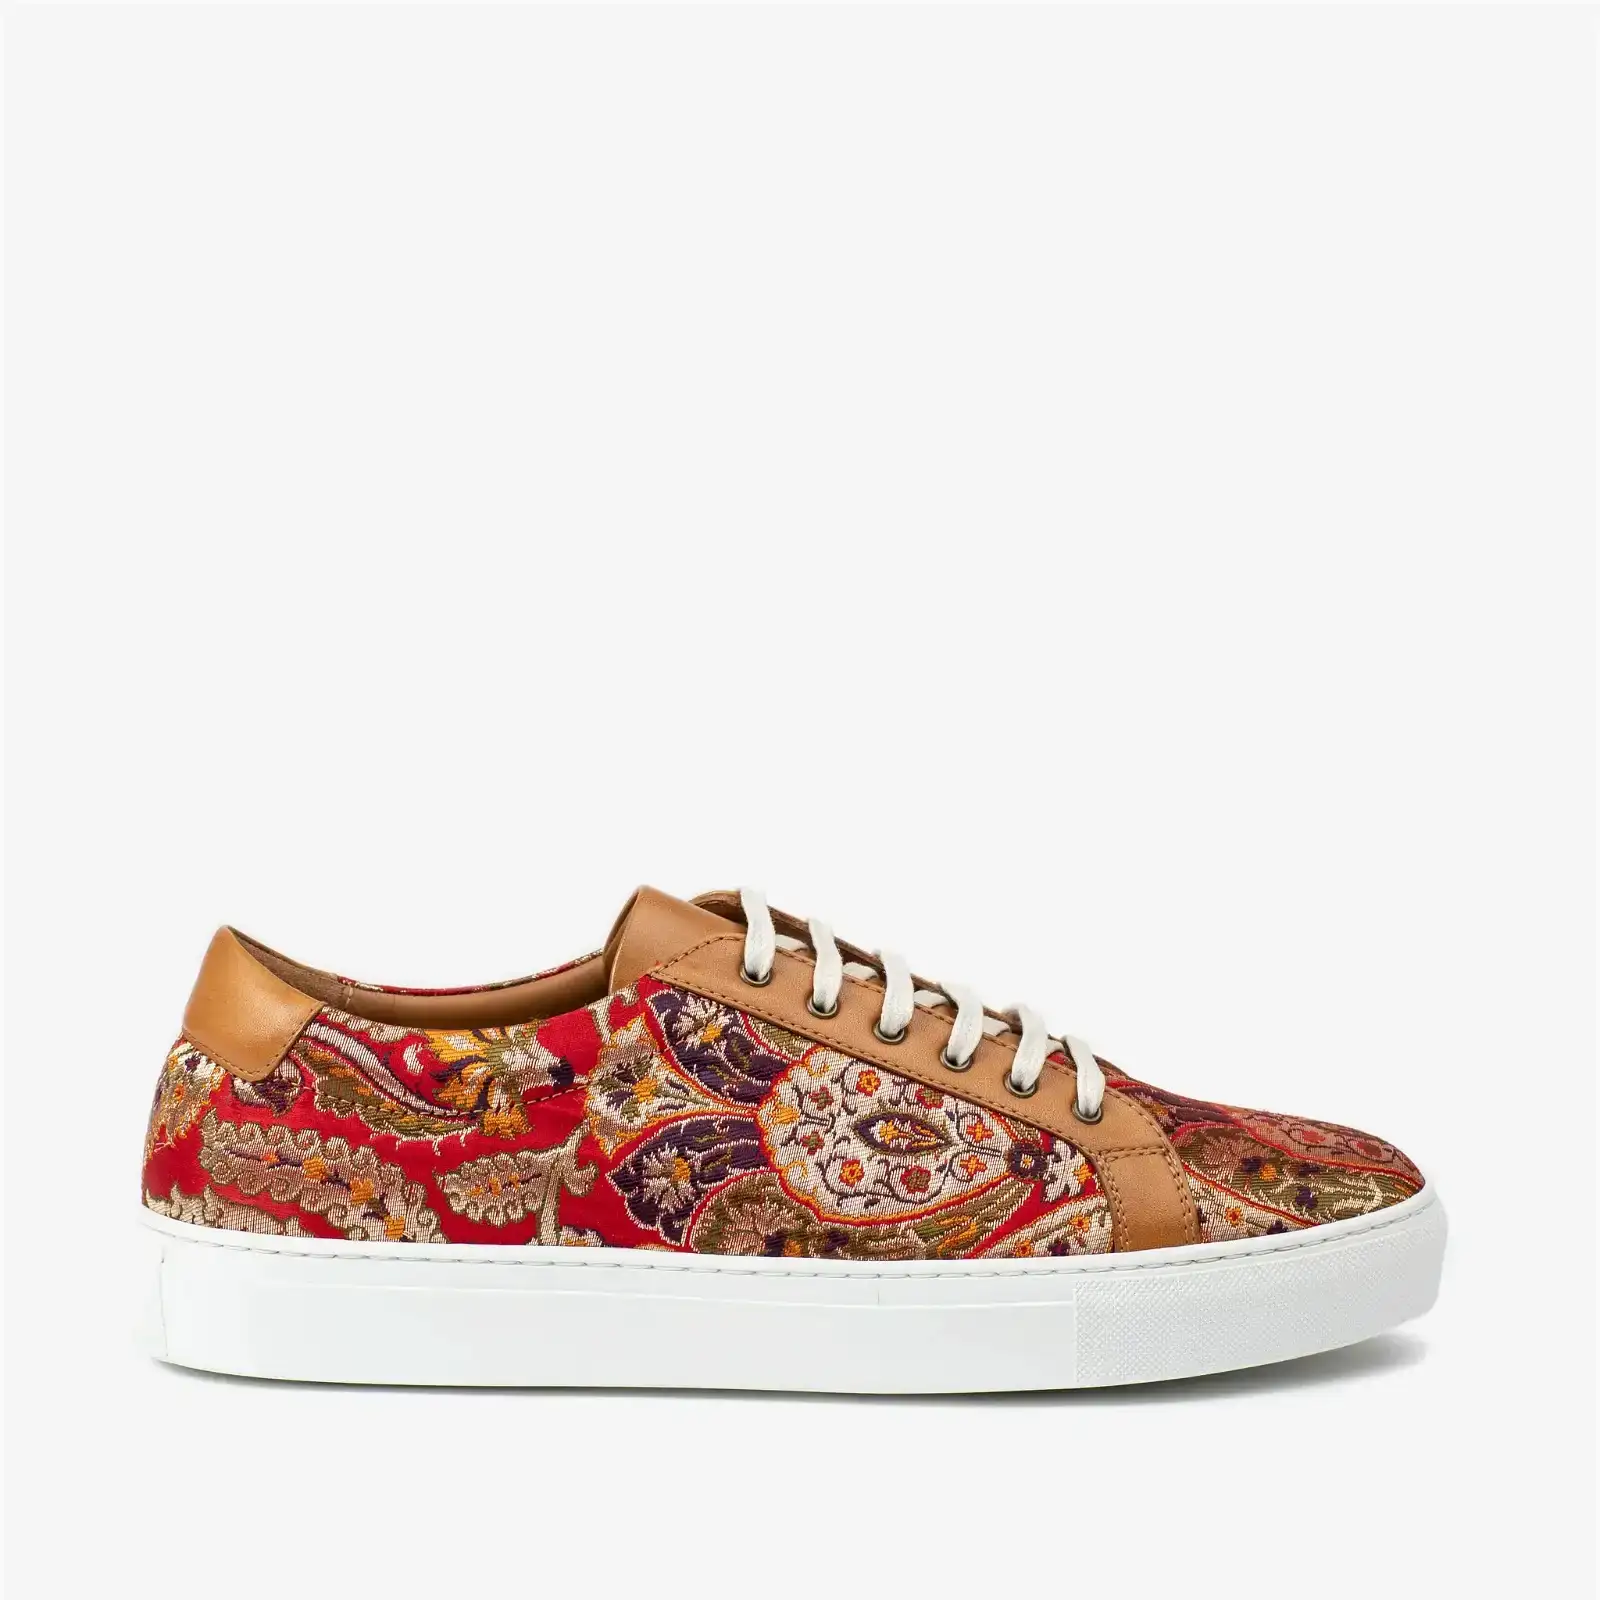 Image of The Sneaker in Red Paisley